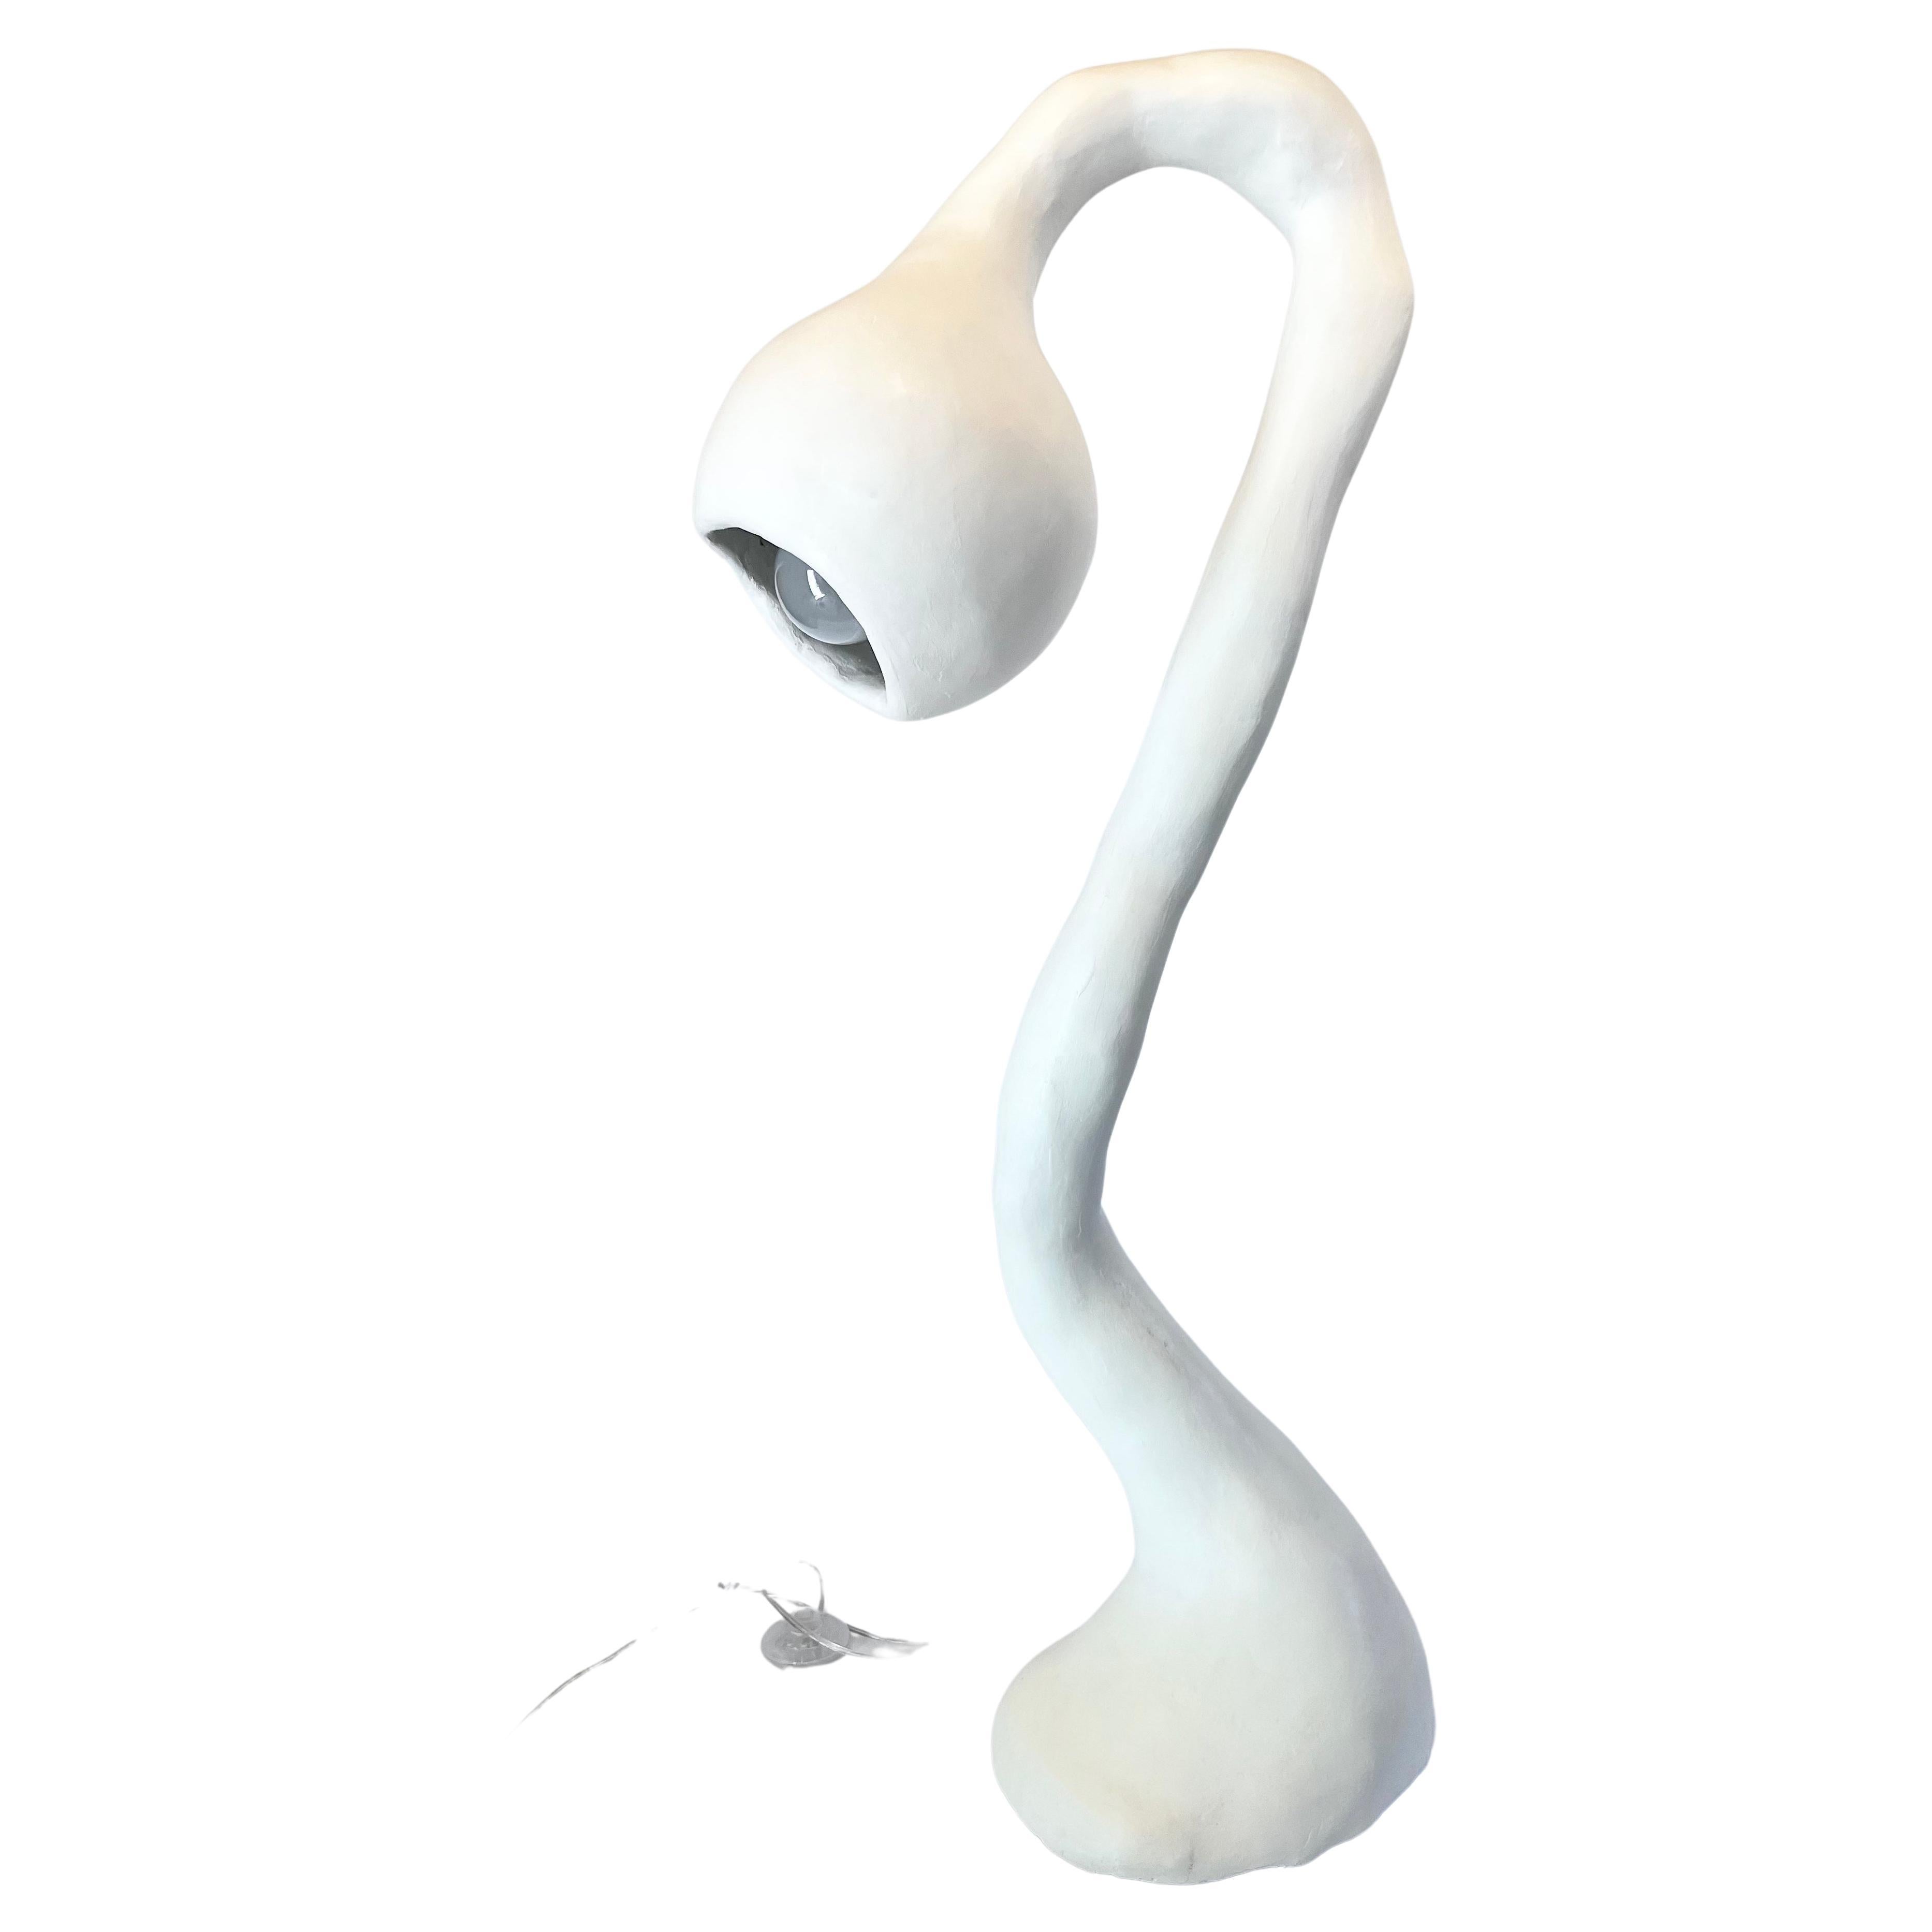 N.003 Floor Lamp from the Biomorphic Series by Studio Chora is inspired by the nature of human experience. This is a second-generation light sculpture that is hand crafted from a composite plaster-based stone. The stone composite is more durable